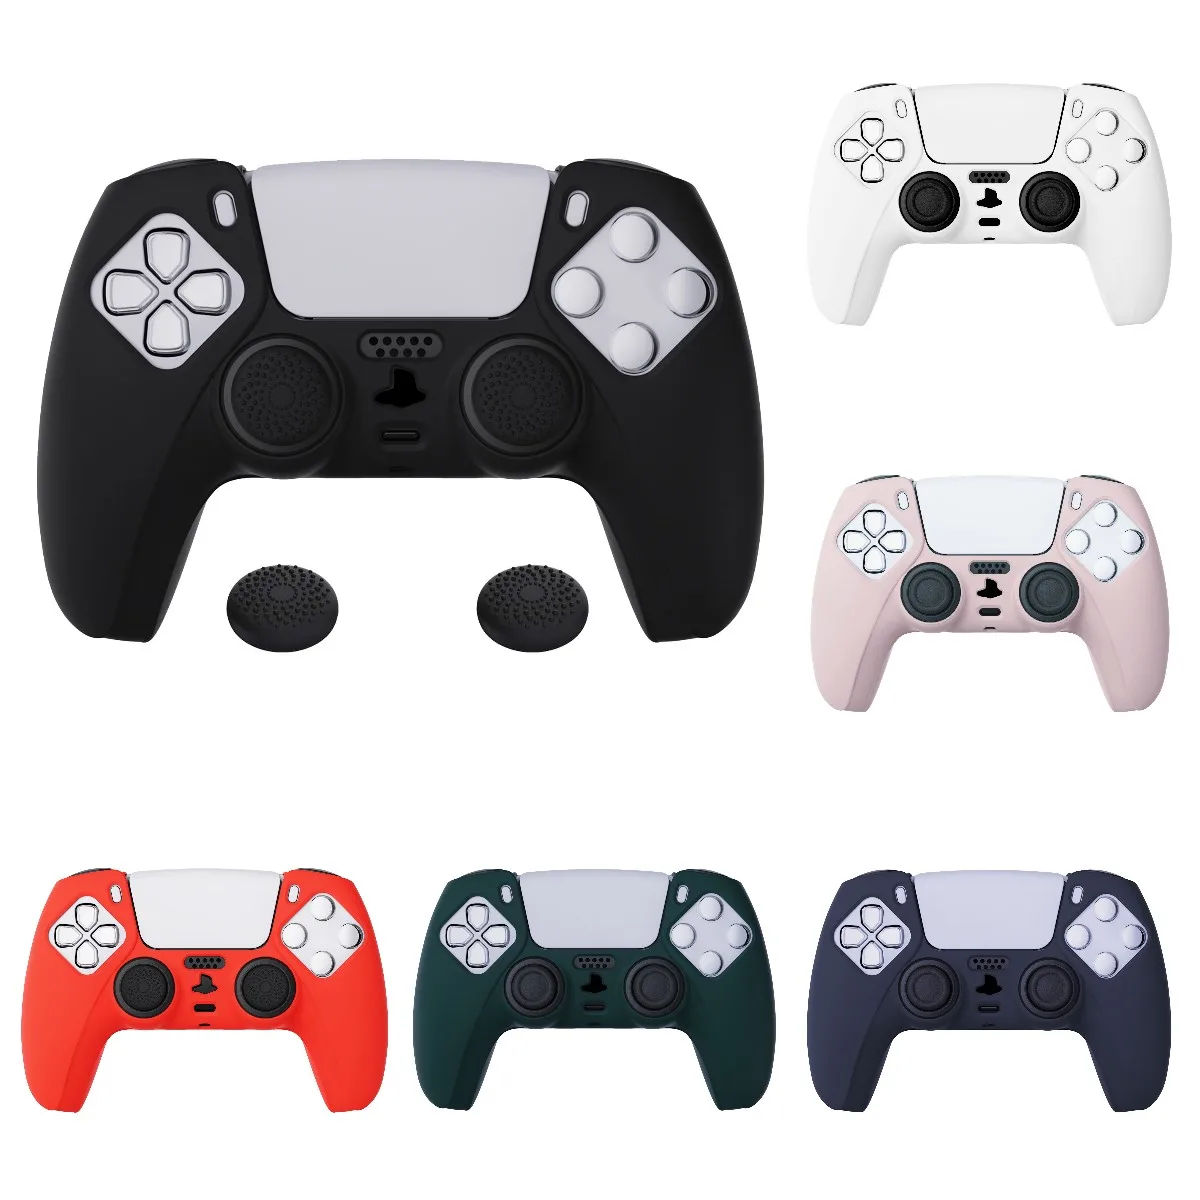 

PlayVital 7 Colors Pure Series Anti-Slip Silicone Cover Skin Soft Rubber Case for ps5 Wireless Controller with 2 Thumb Grip Caps